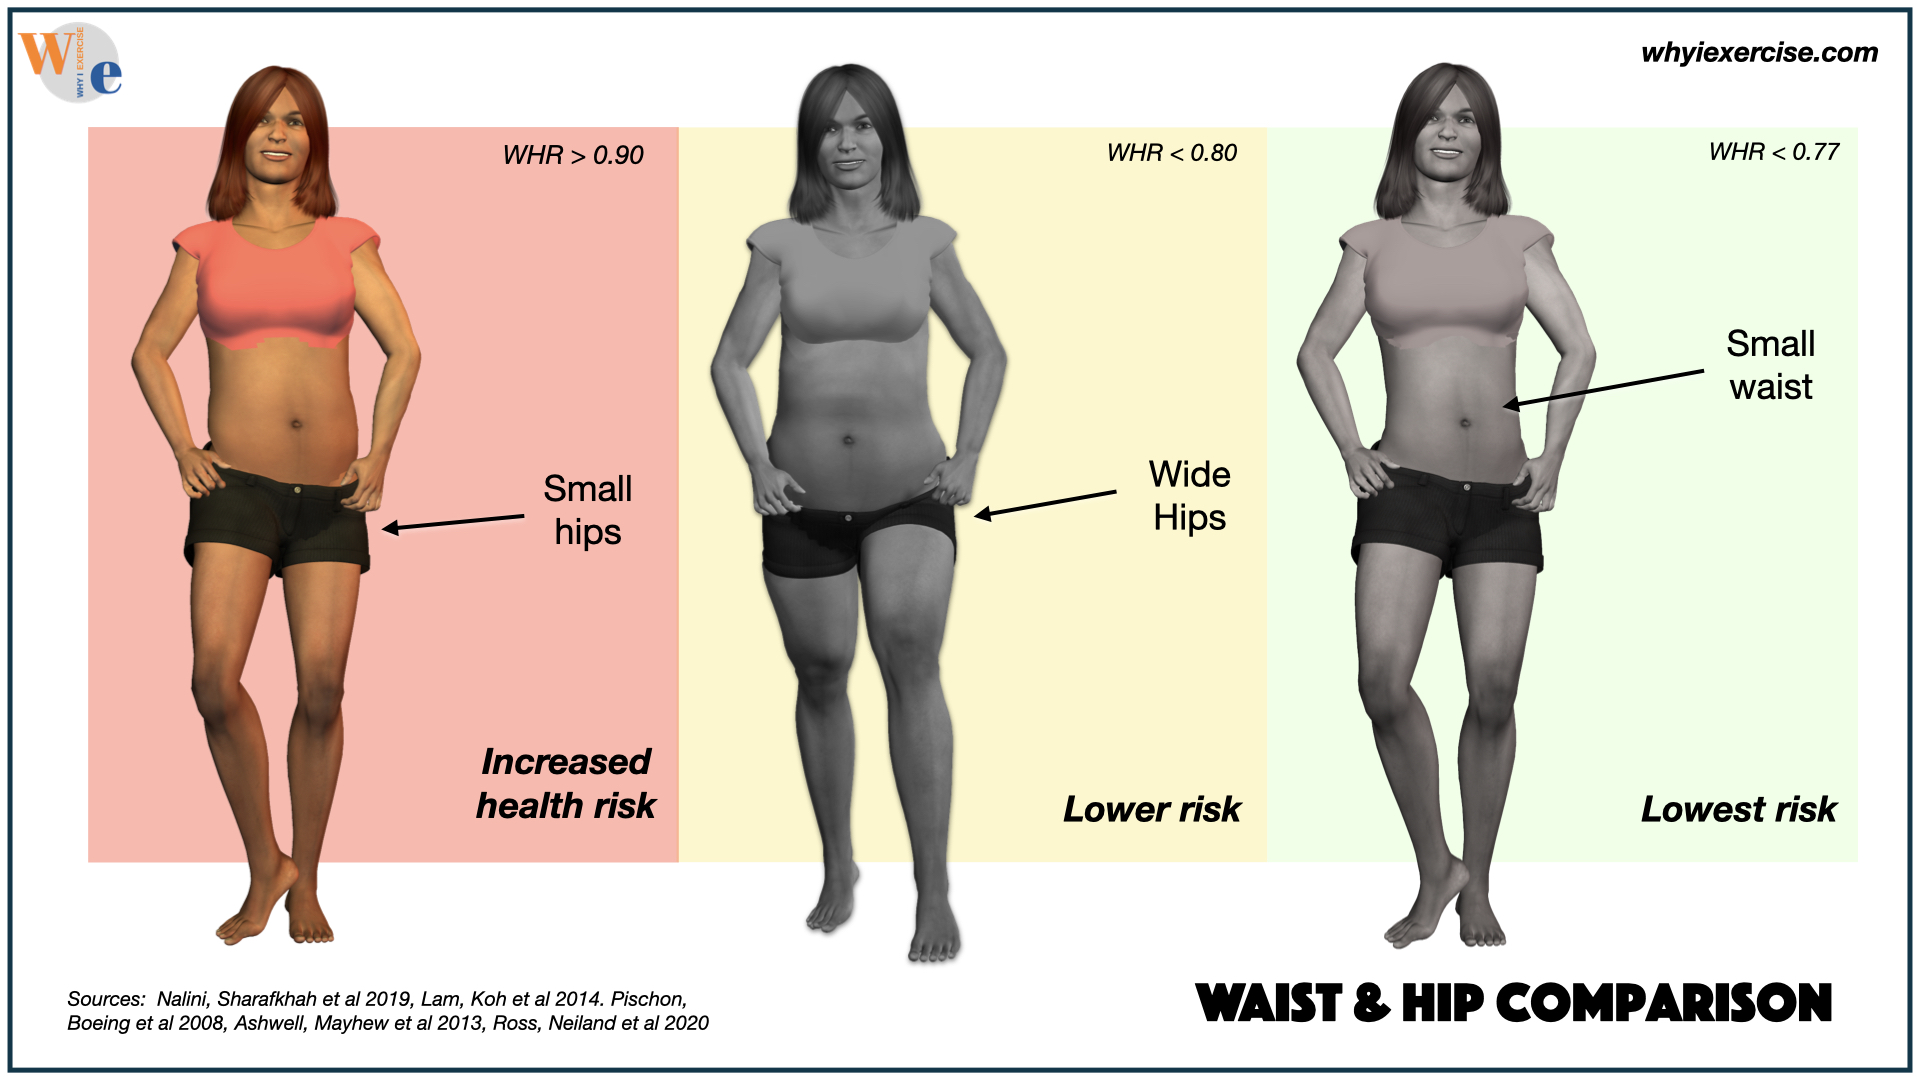 https://www.whyiexercise.com/images/waist.hip.circumference.comparison.jpg